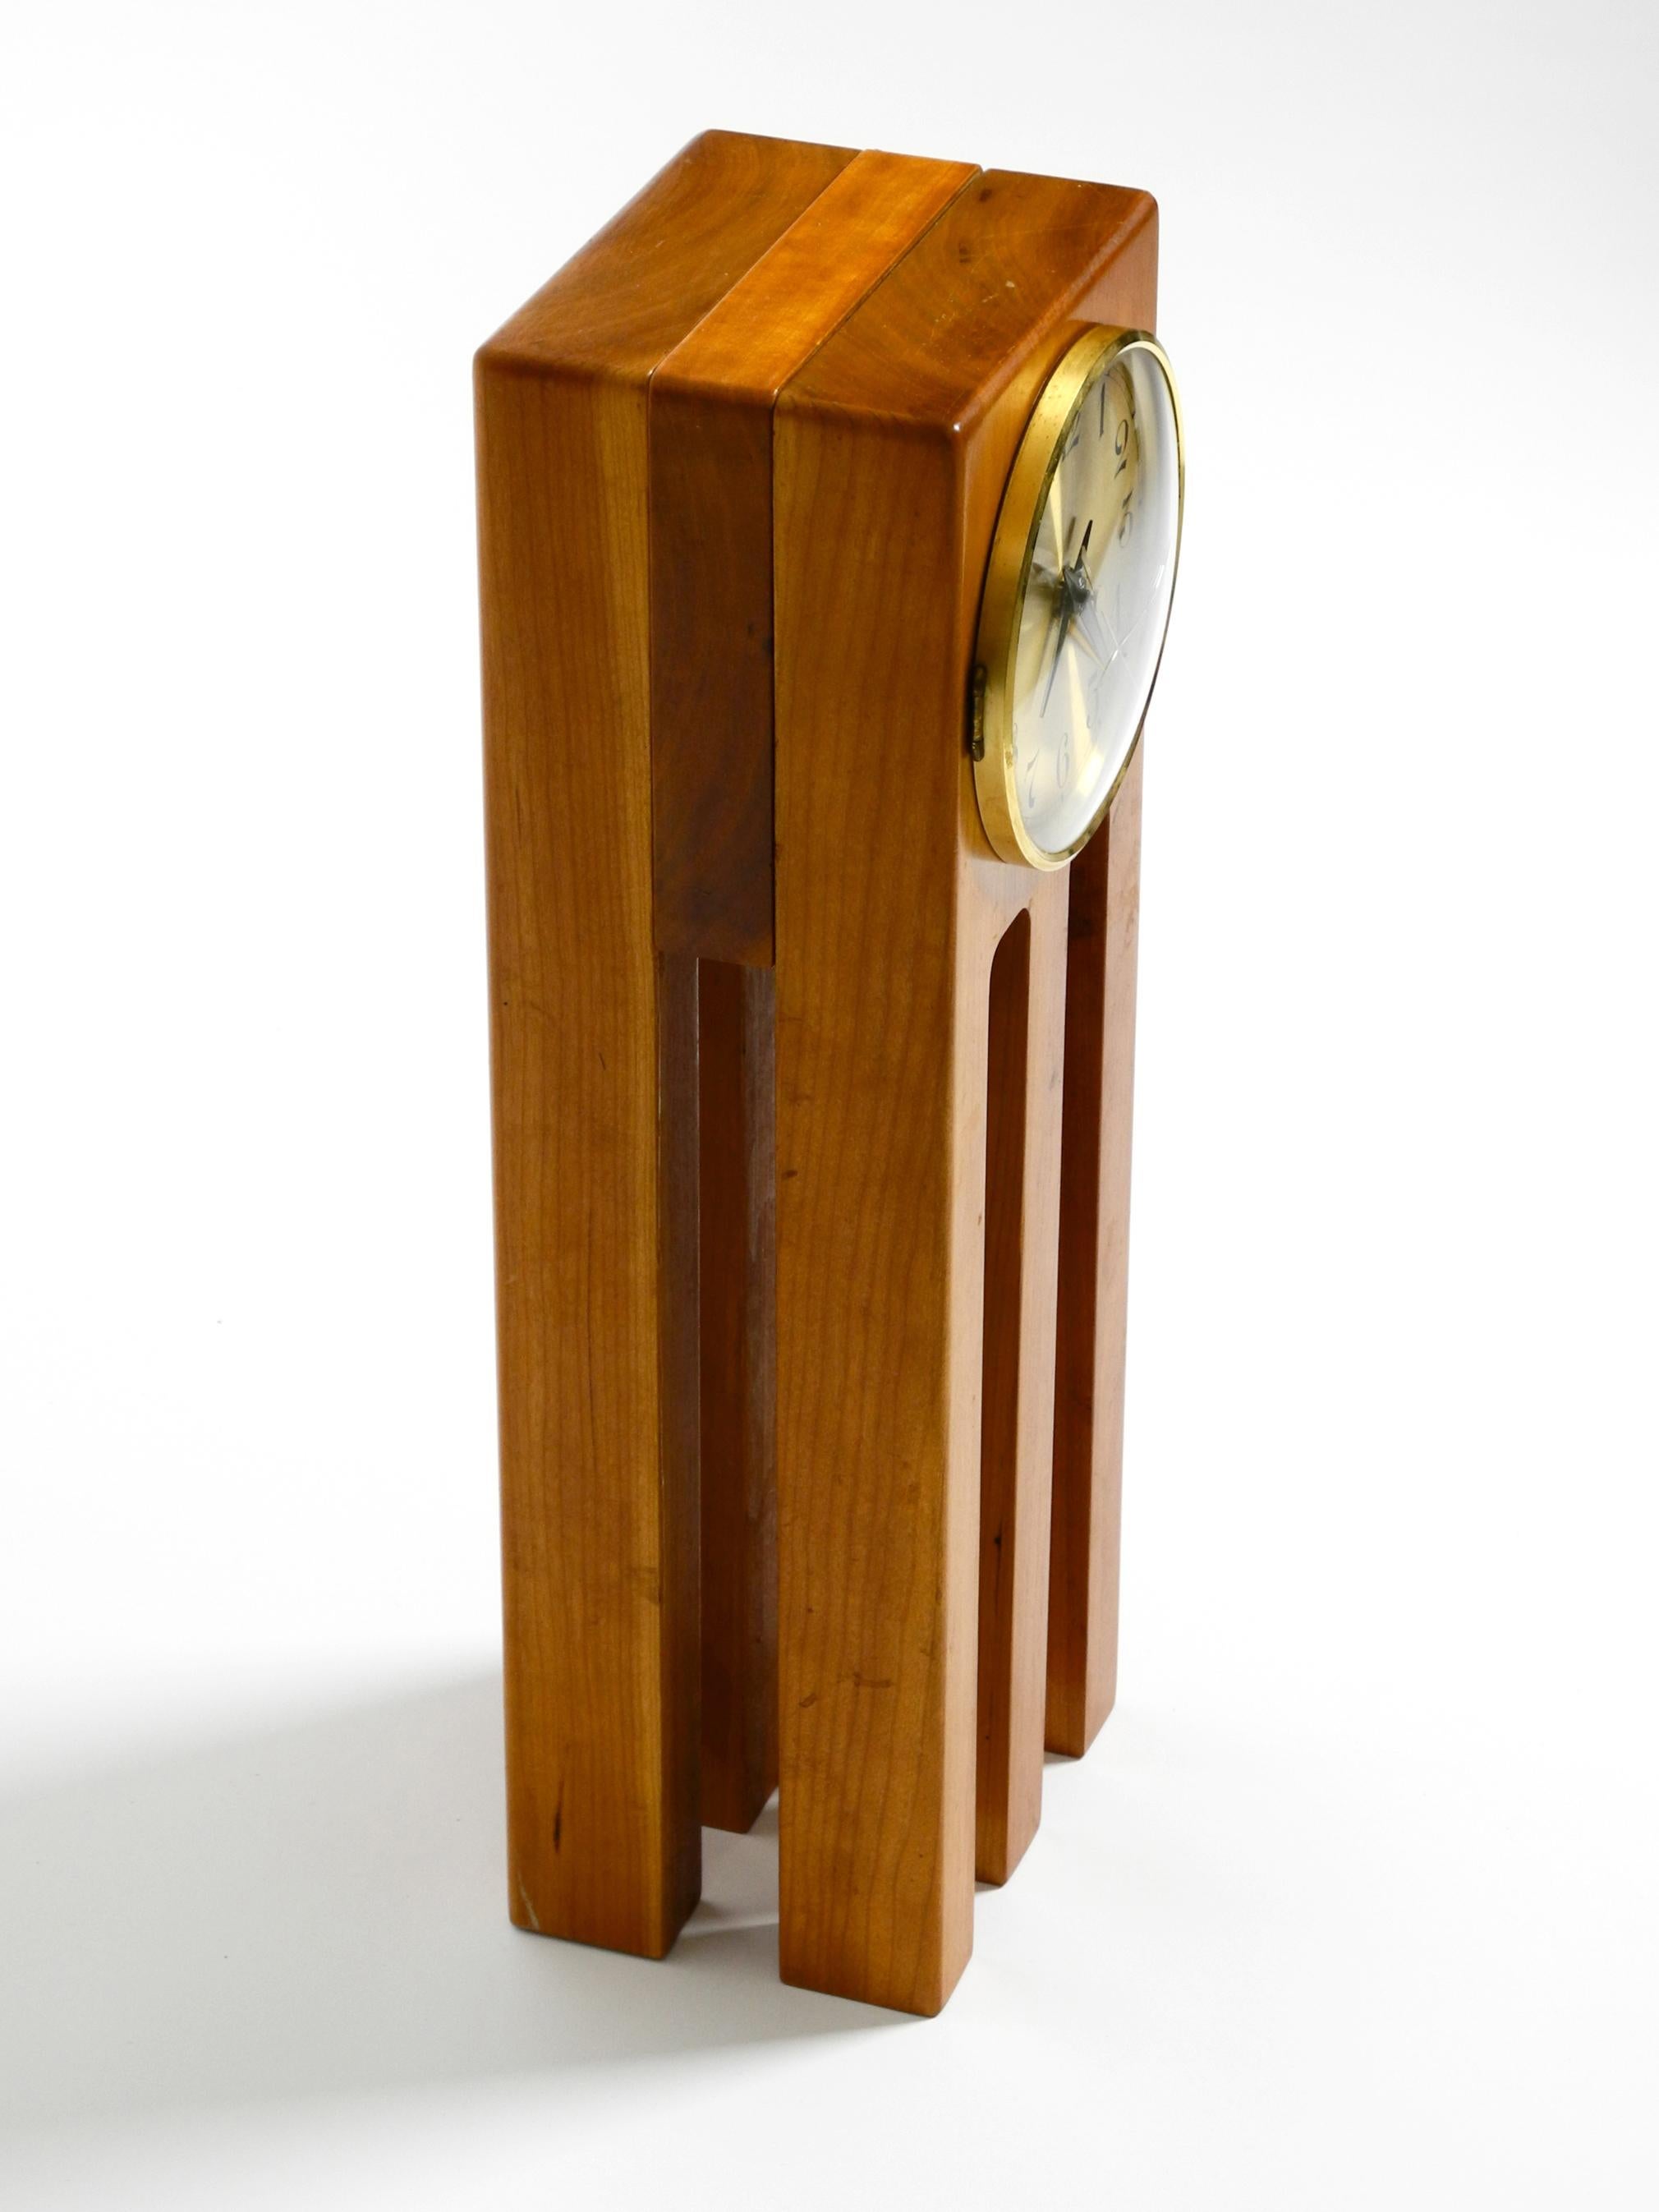 German Large, Unusual 1980s Postmodern Design Table Clock Made of Cherry Wood For Sale